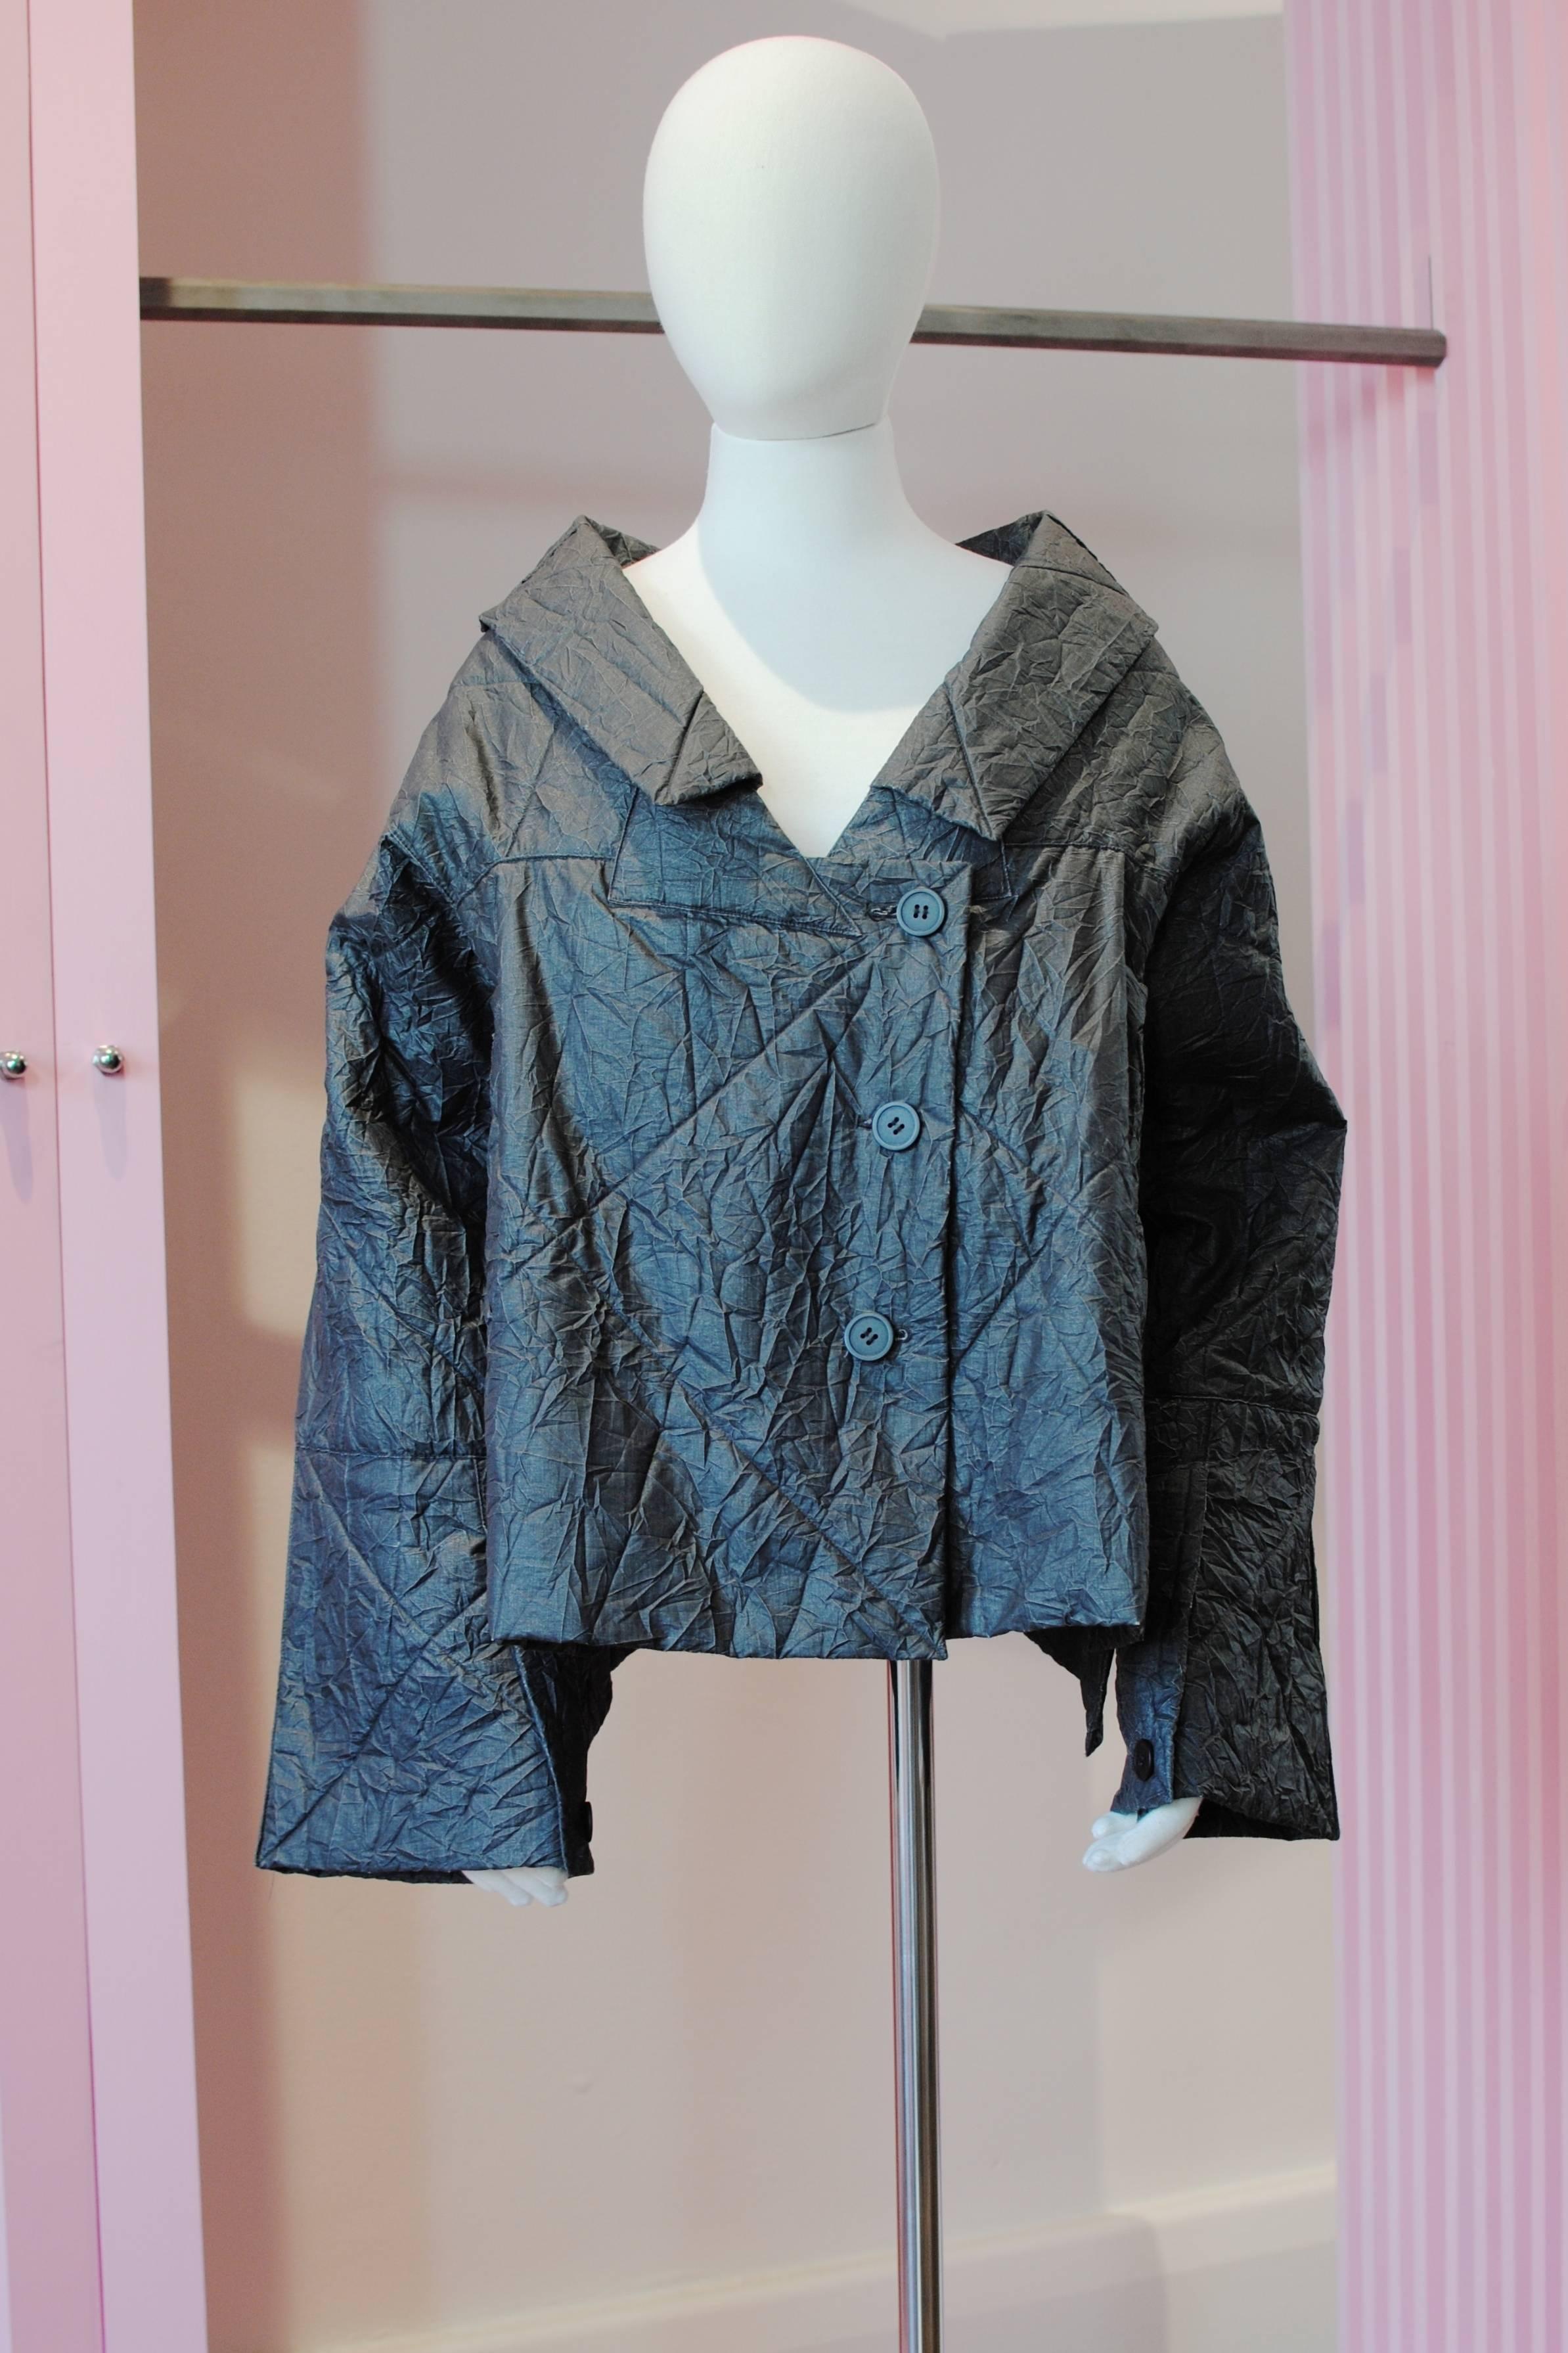 1998 Issey Miyake black crinkle origami jacket In Excellent Condition For Sale In Melbourne, Victoria